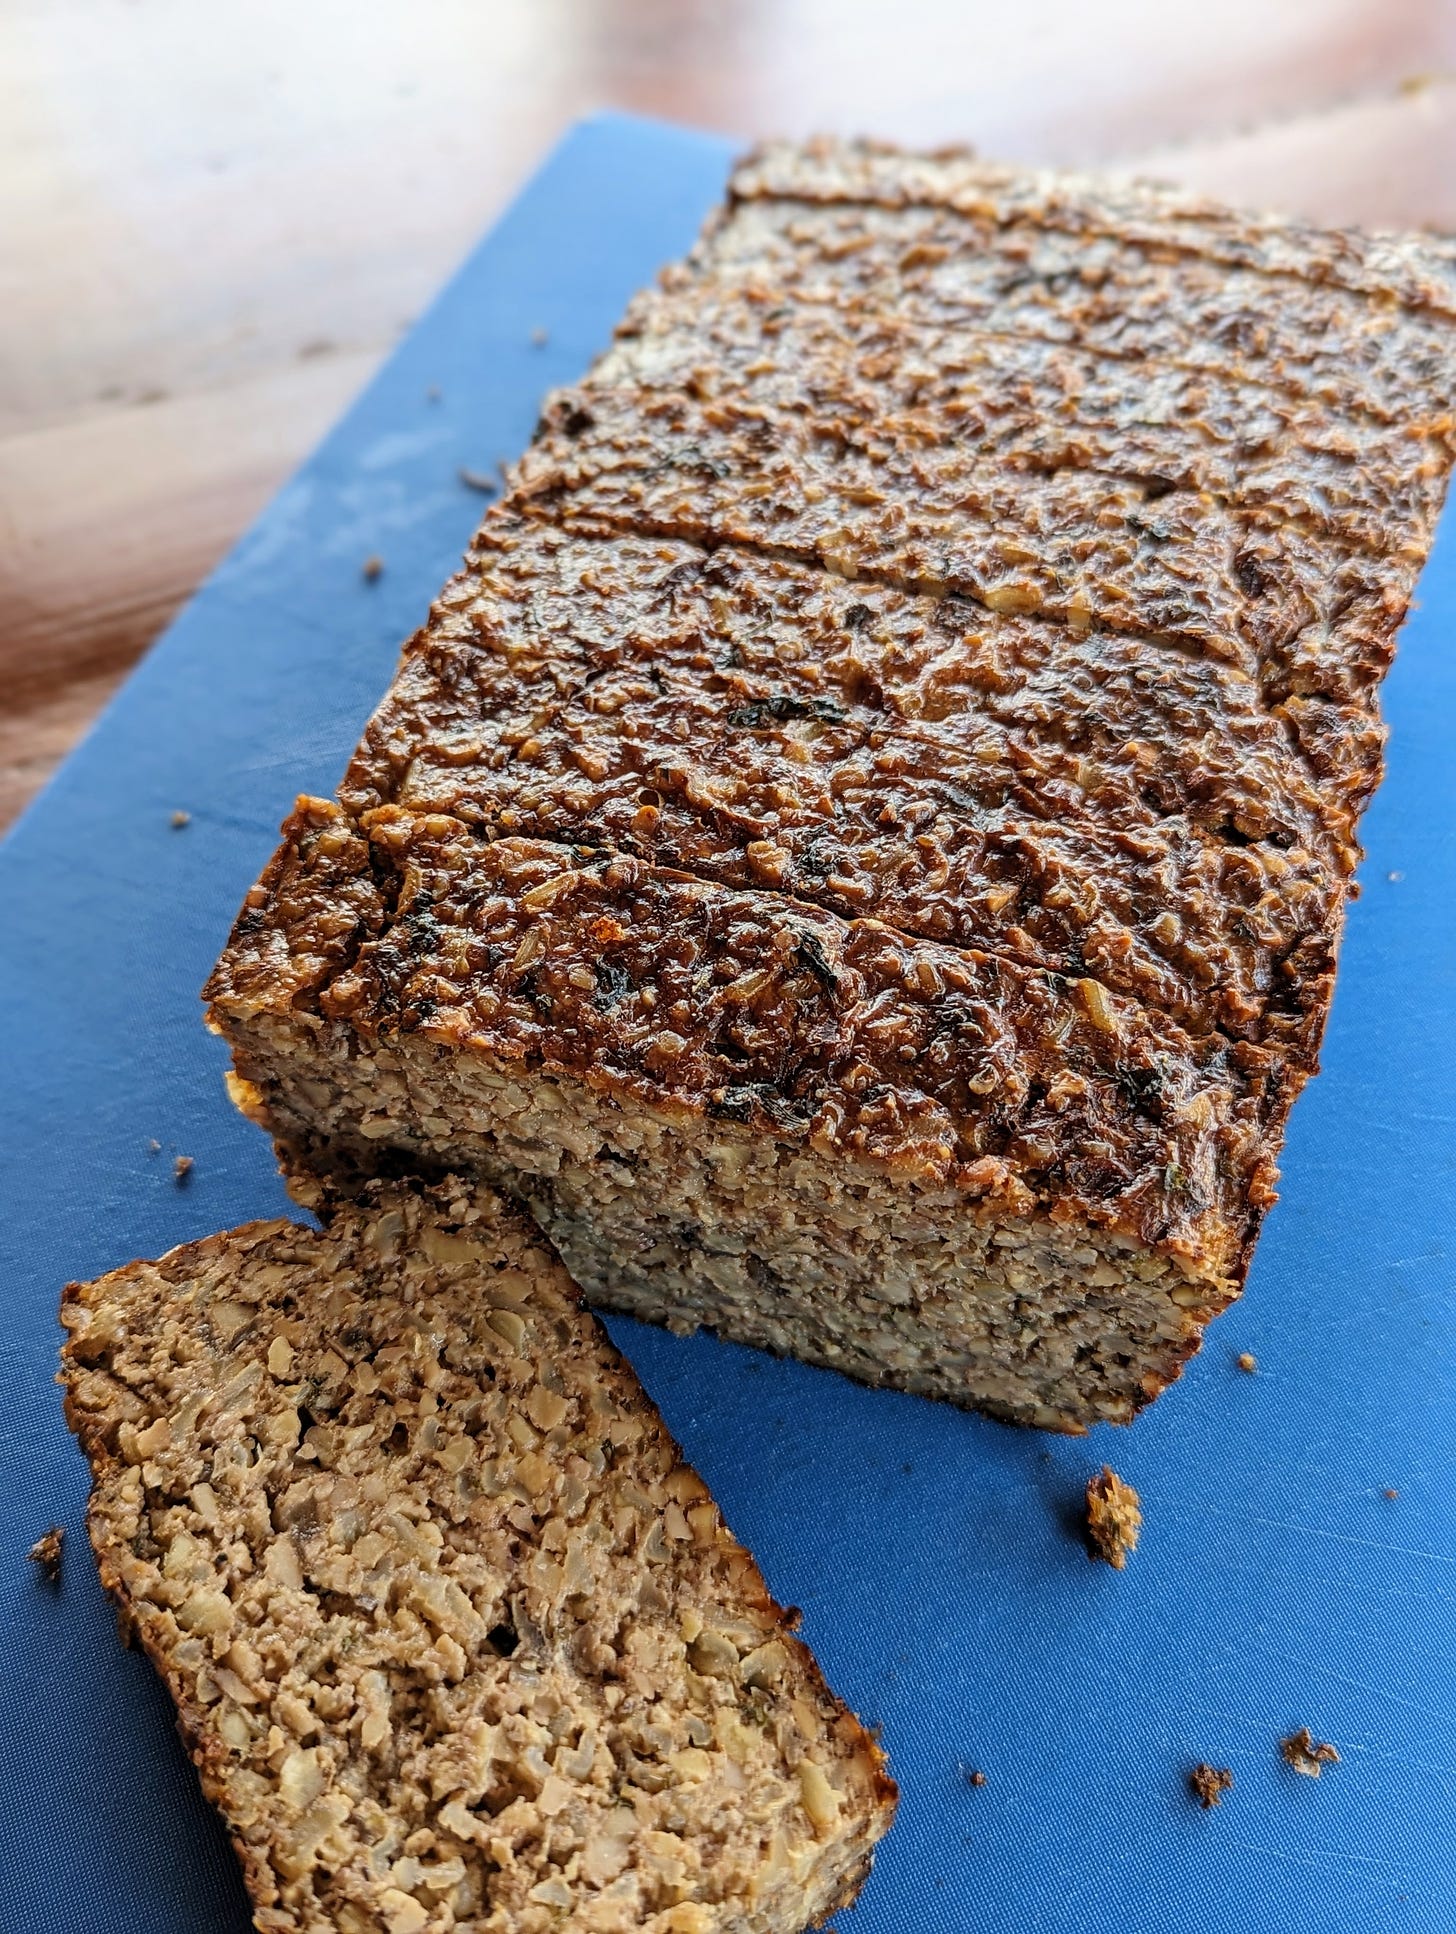 A cutting board with sliced vegetarian nut loaf.